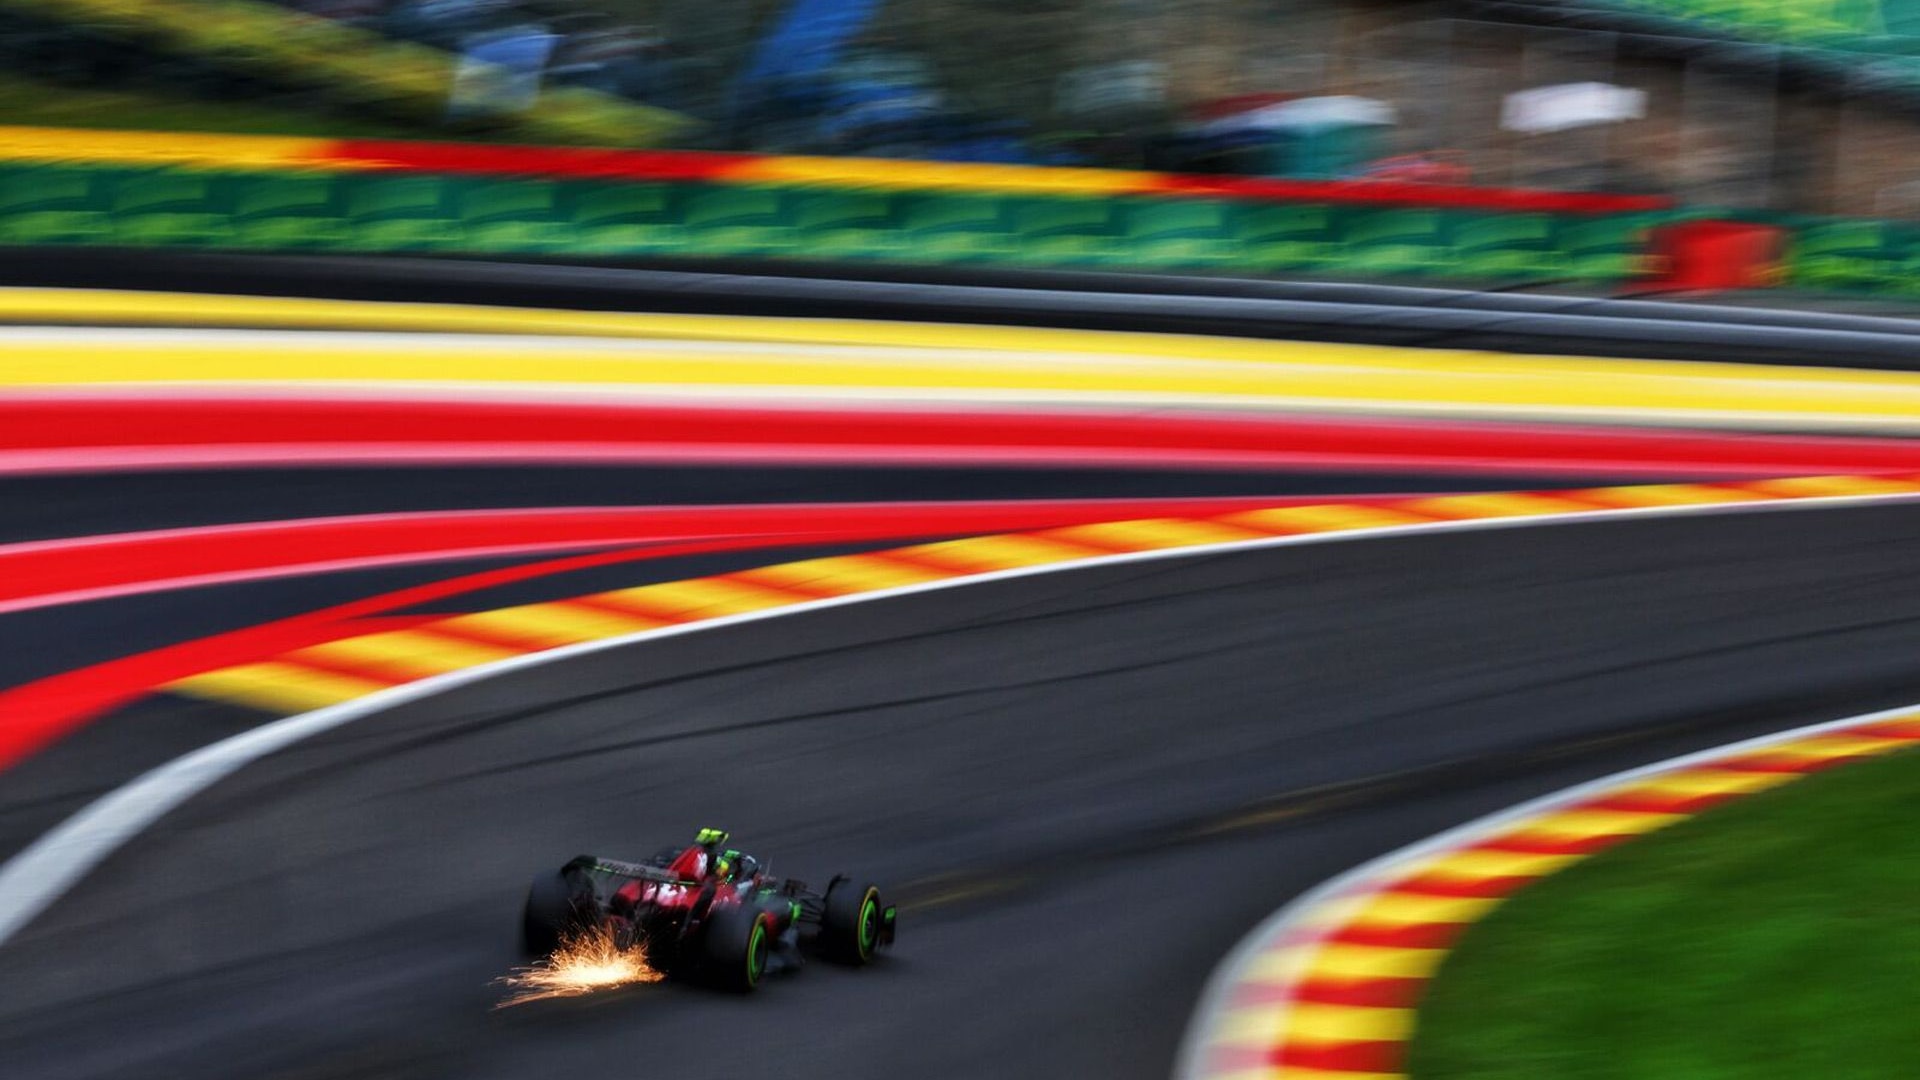 Spa-Francorchamps, home of the Formula 1 Belgian Grand Prix